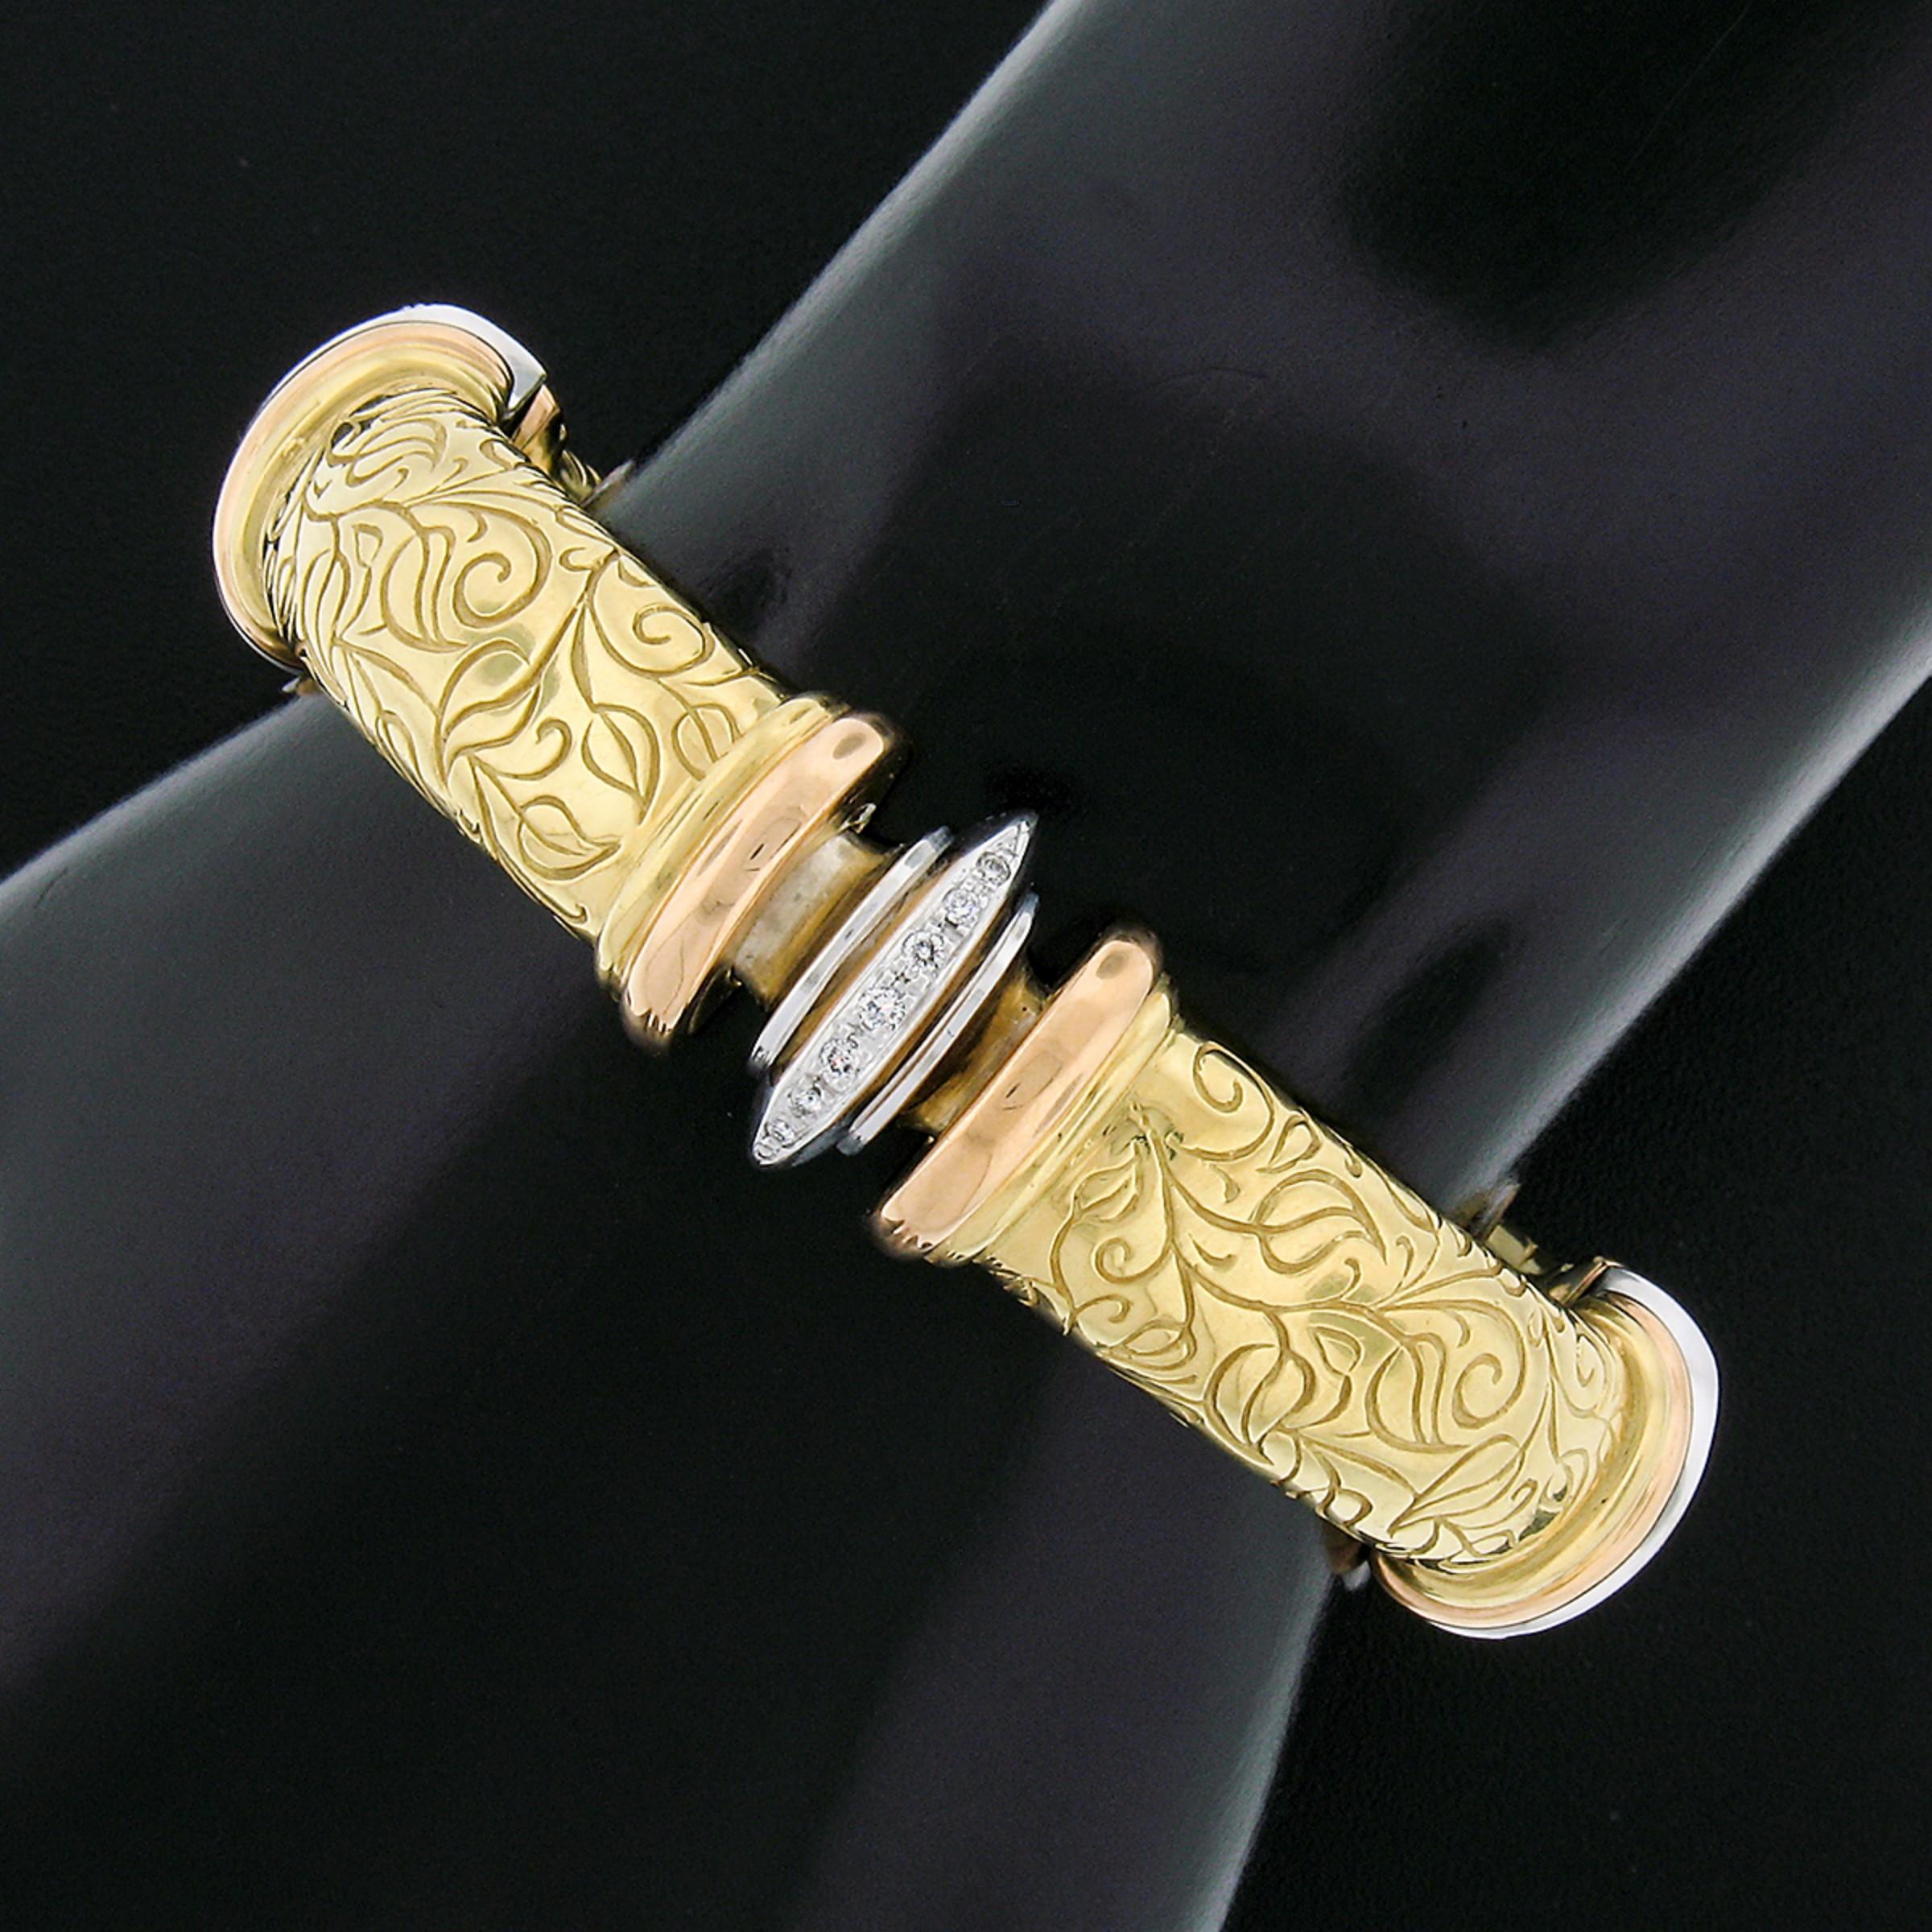 Here we have an elegant statement bracelet designed by SeidenGang that is very well crafted from 18k yellow and white gold. It features 4, long, slightly puffed, polished links that are beautifully detailed with signature engraved floral work